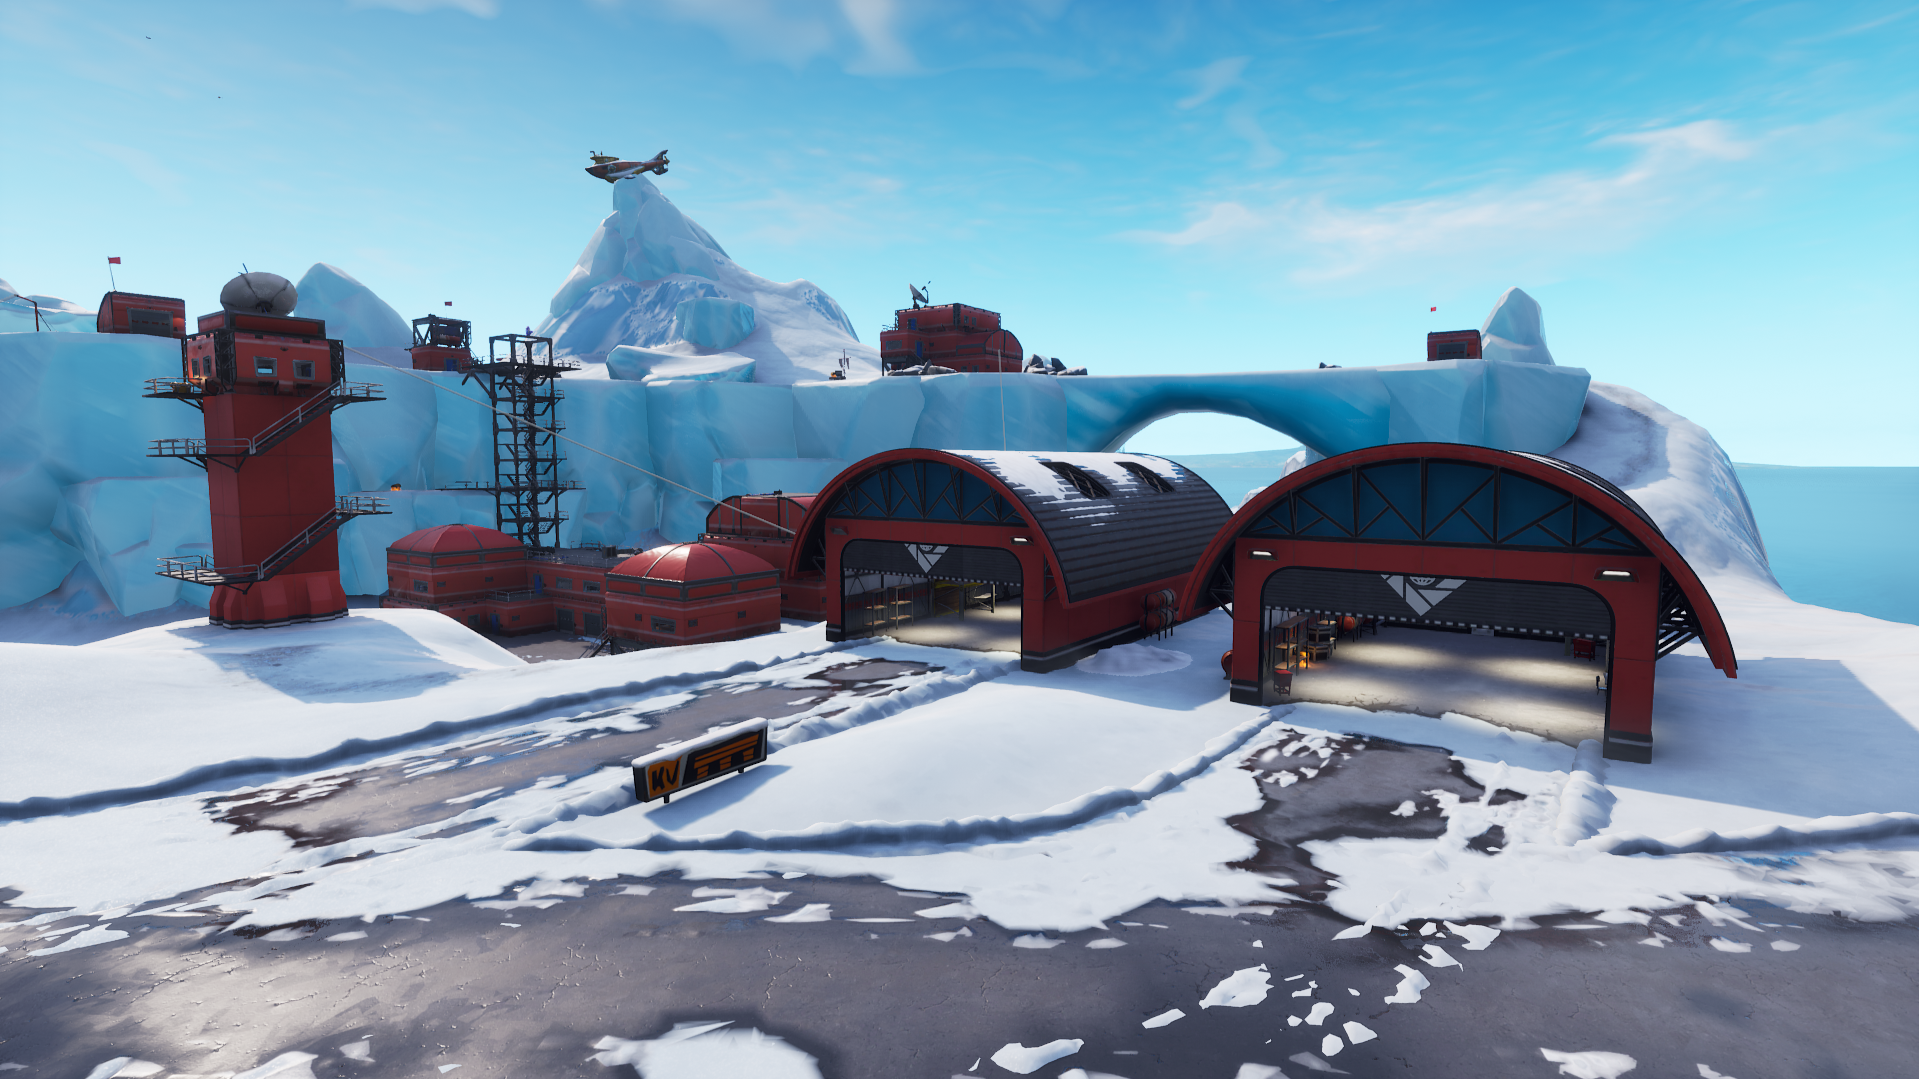 Season 7 Map Changes The Iceberg Greasy Grove Flooding More - the v7 0 update introduced a new vehicle into fortnite called the x 4 stormwing plane and frosty flights is the hangar which homes quite a few of them